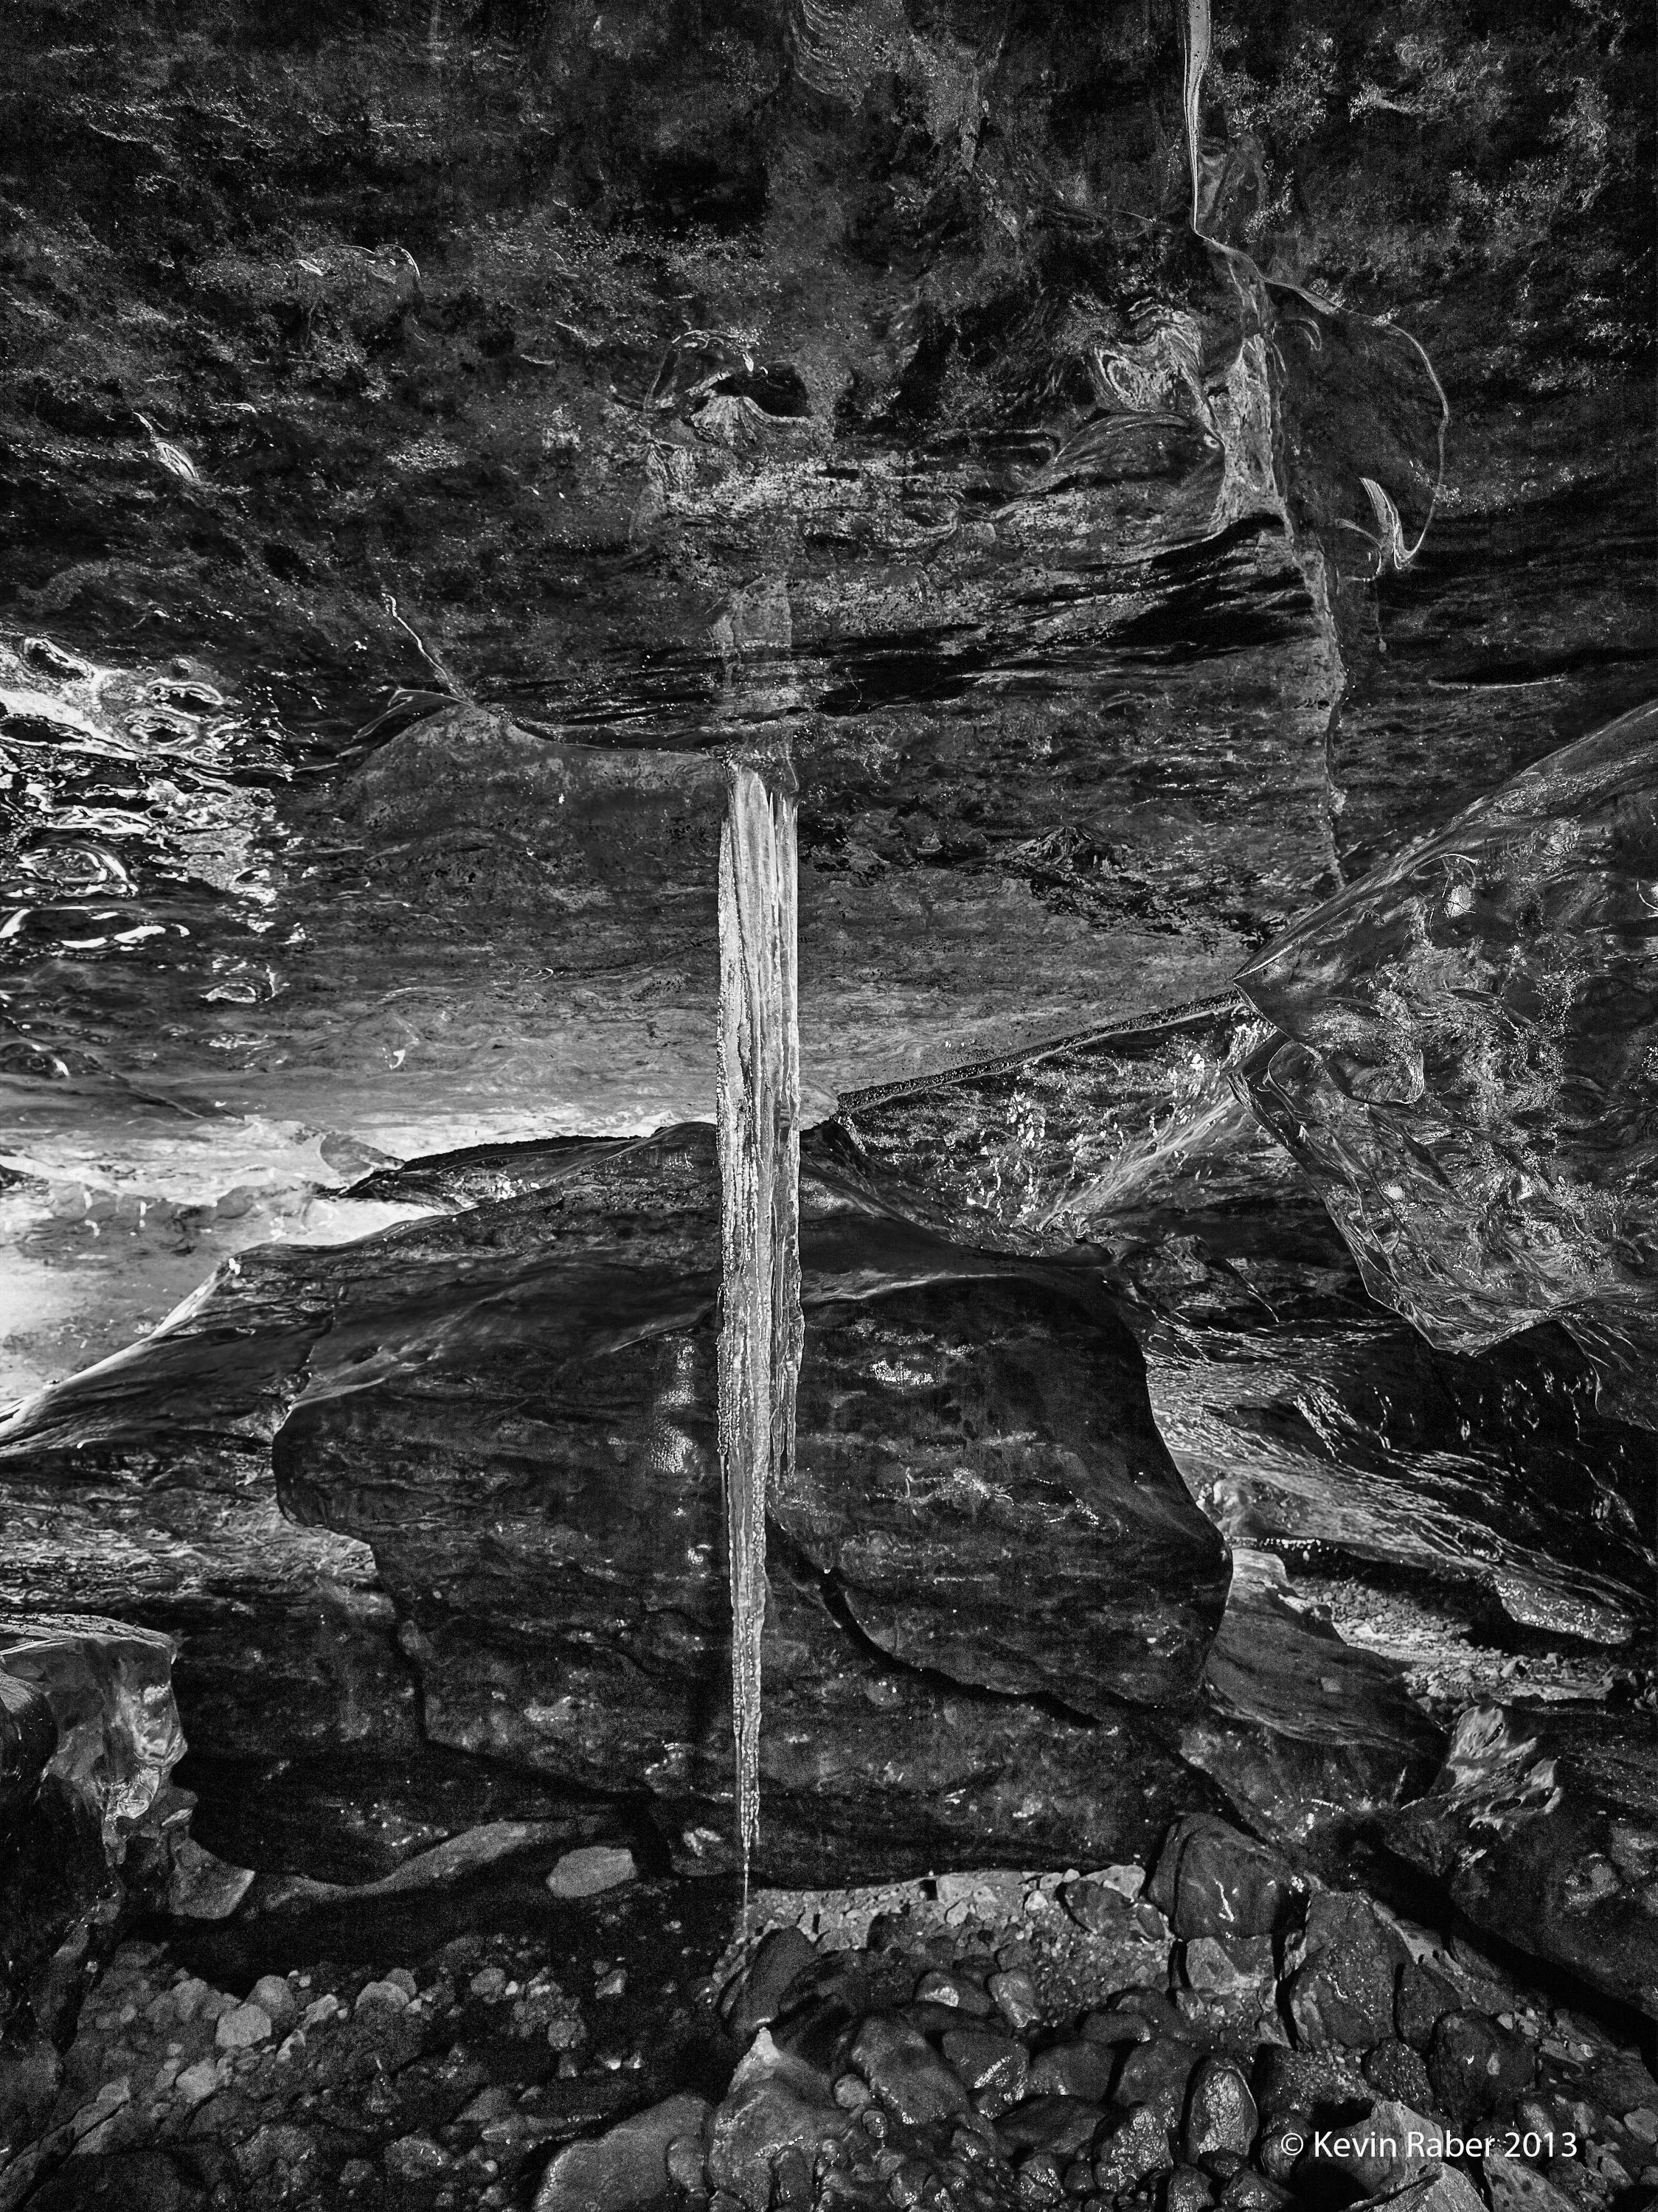 The Ice Cave in Black and White